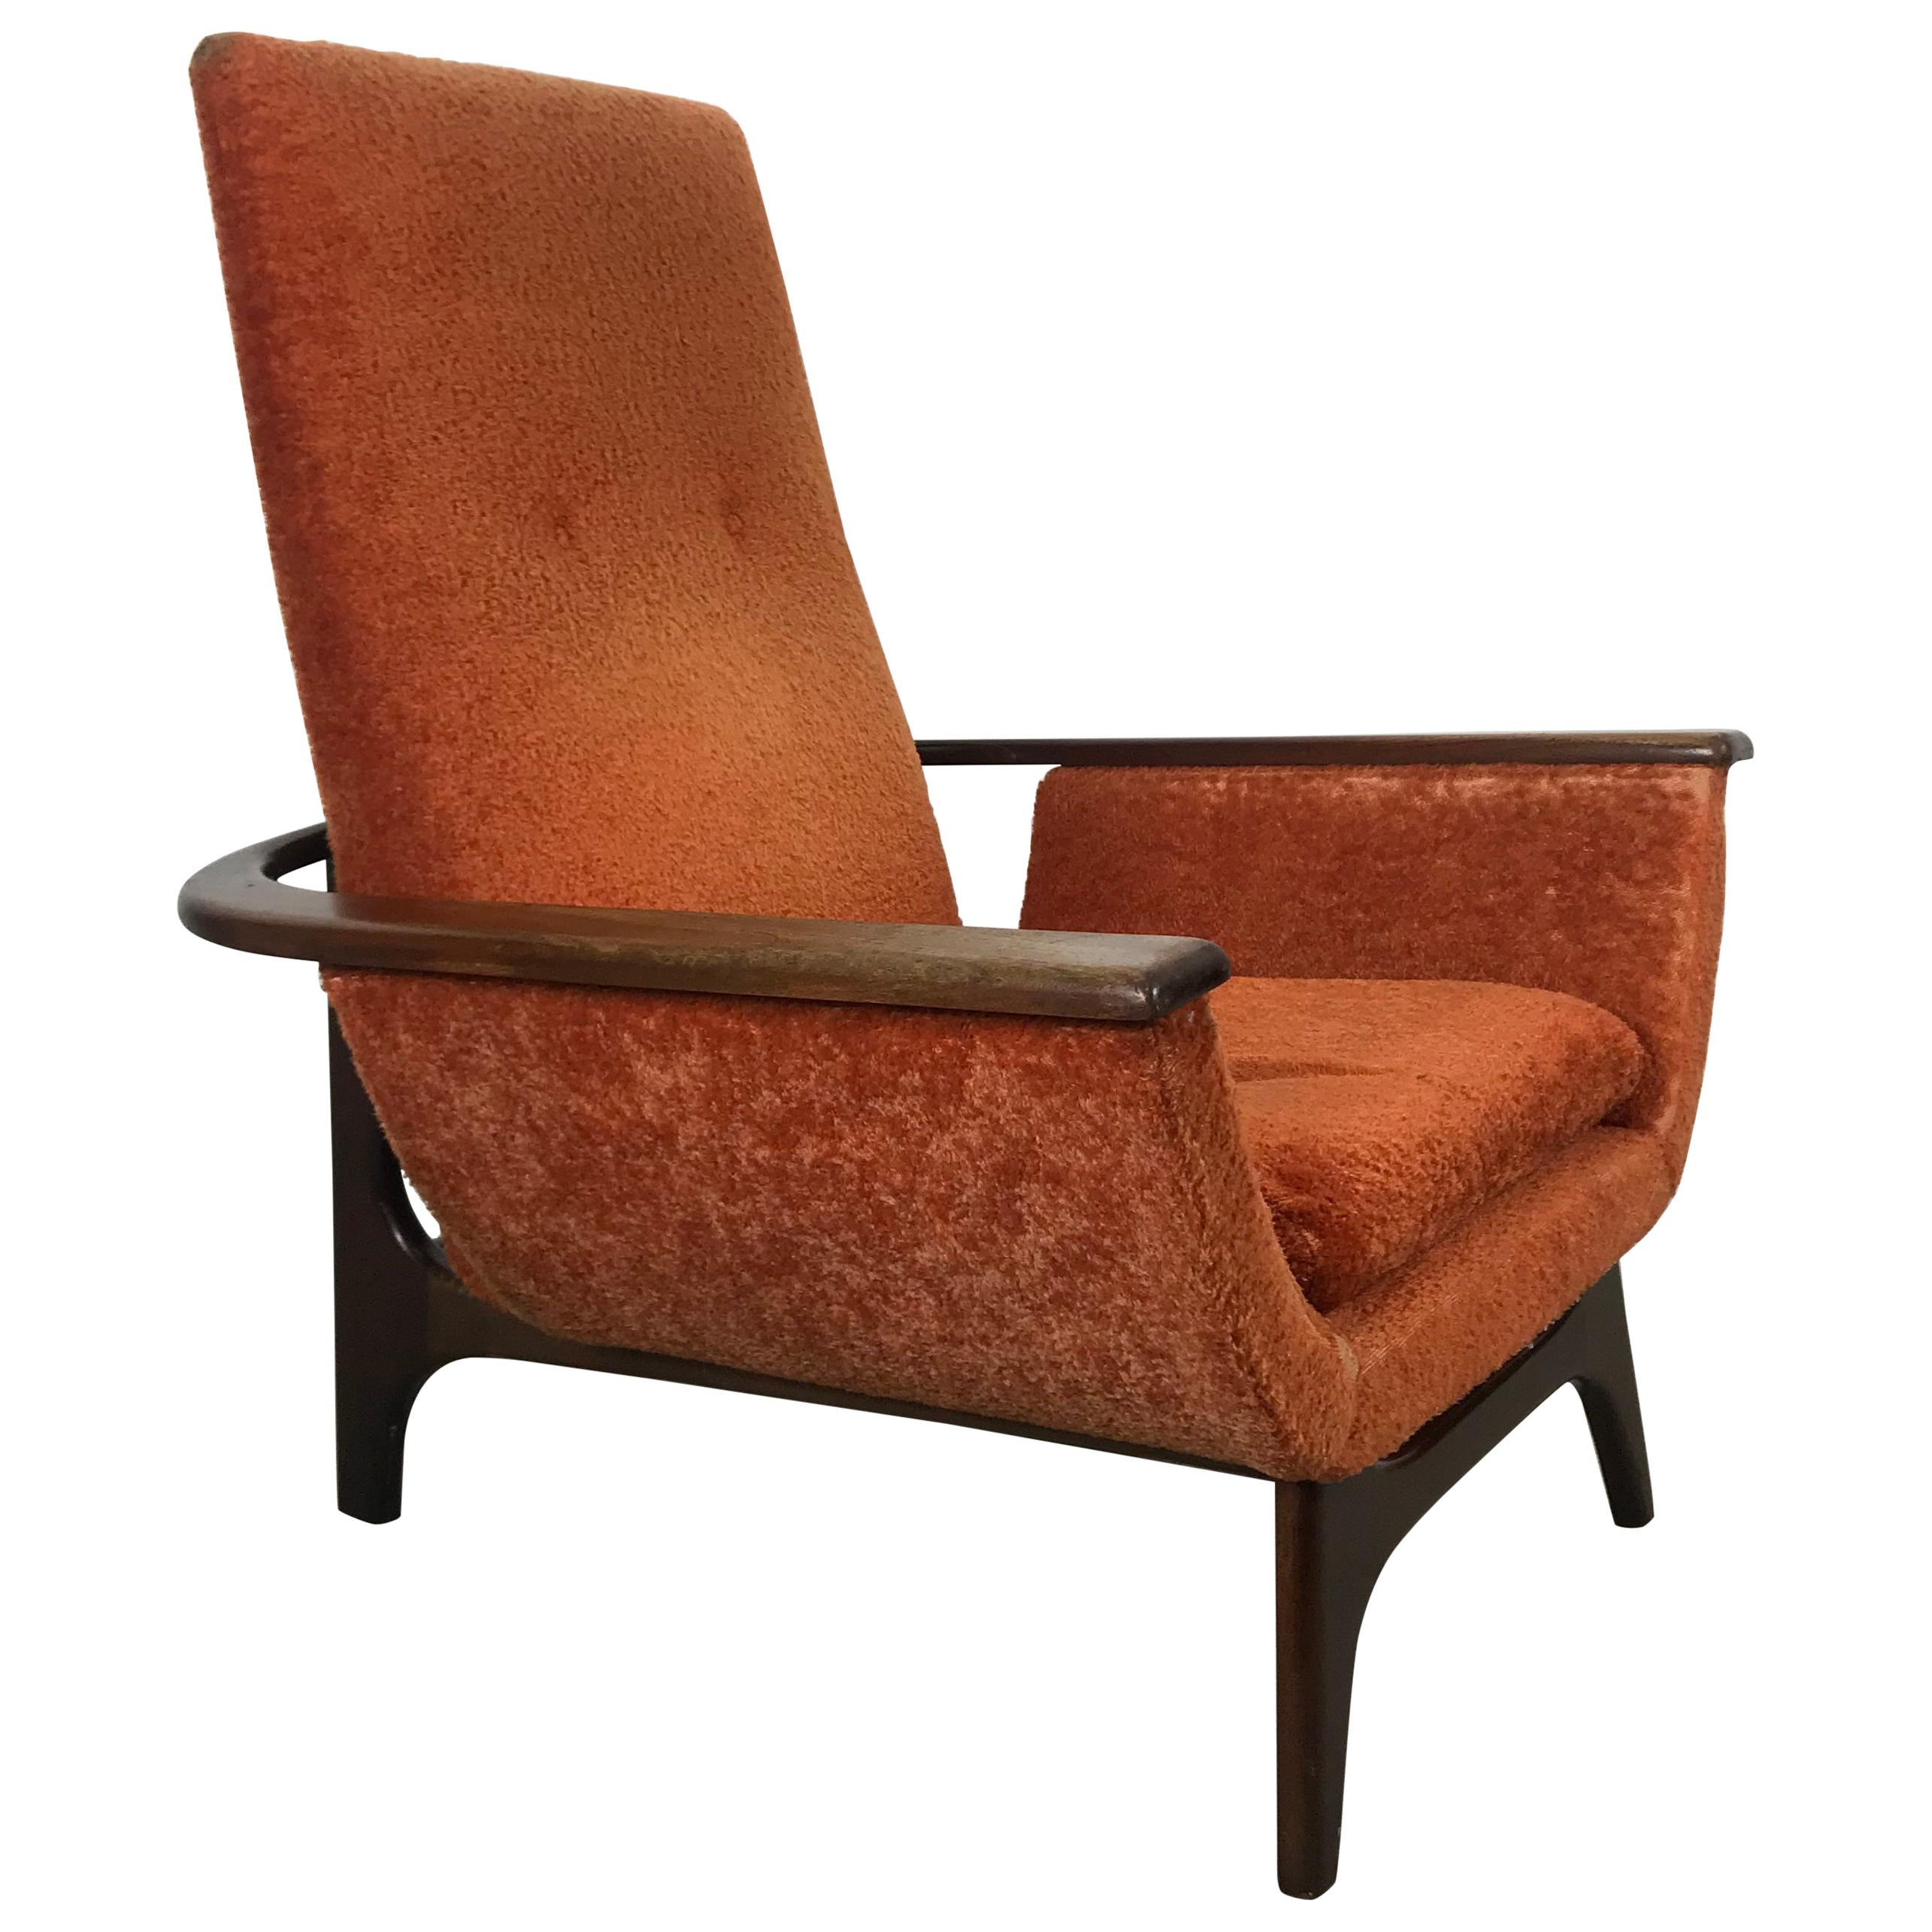 Dramatic Modernist Lounge Chair, Sculpted Walnut by Luigi Tiengo for Cimon